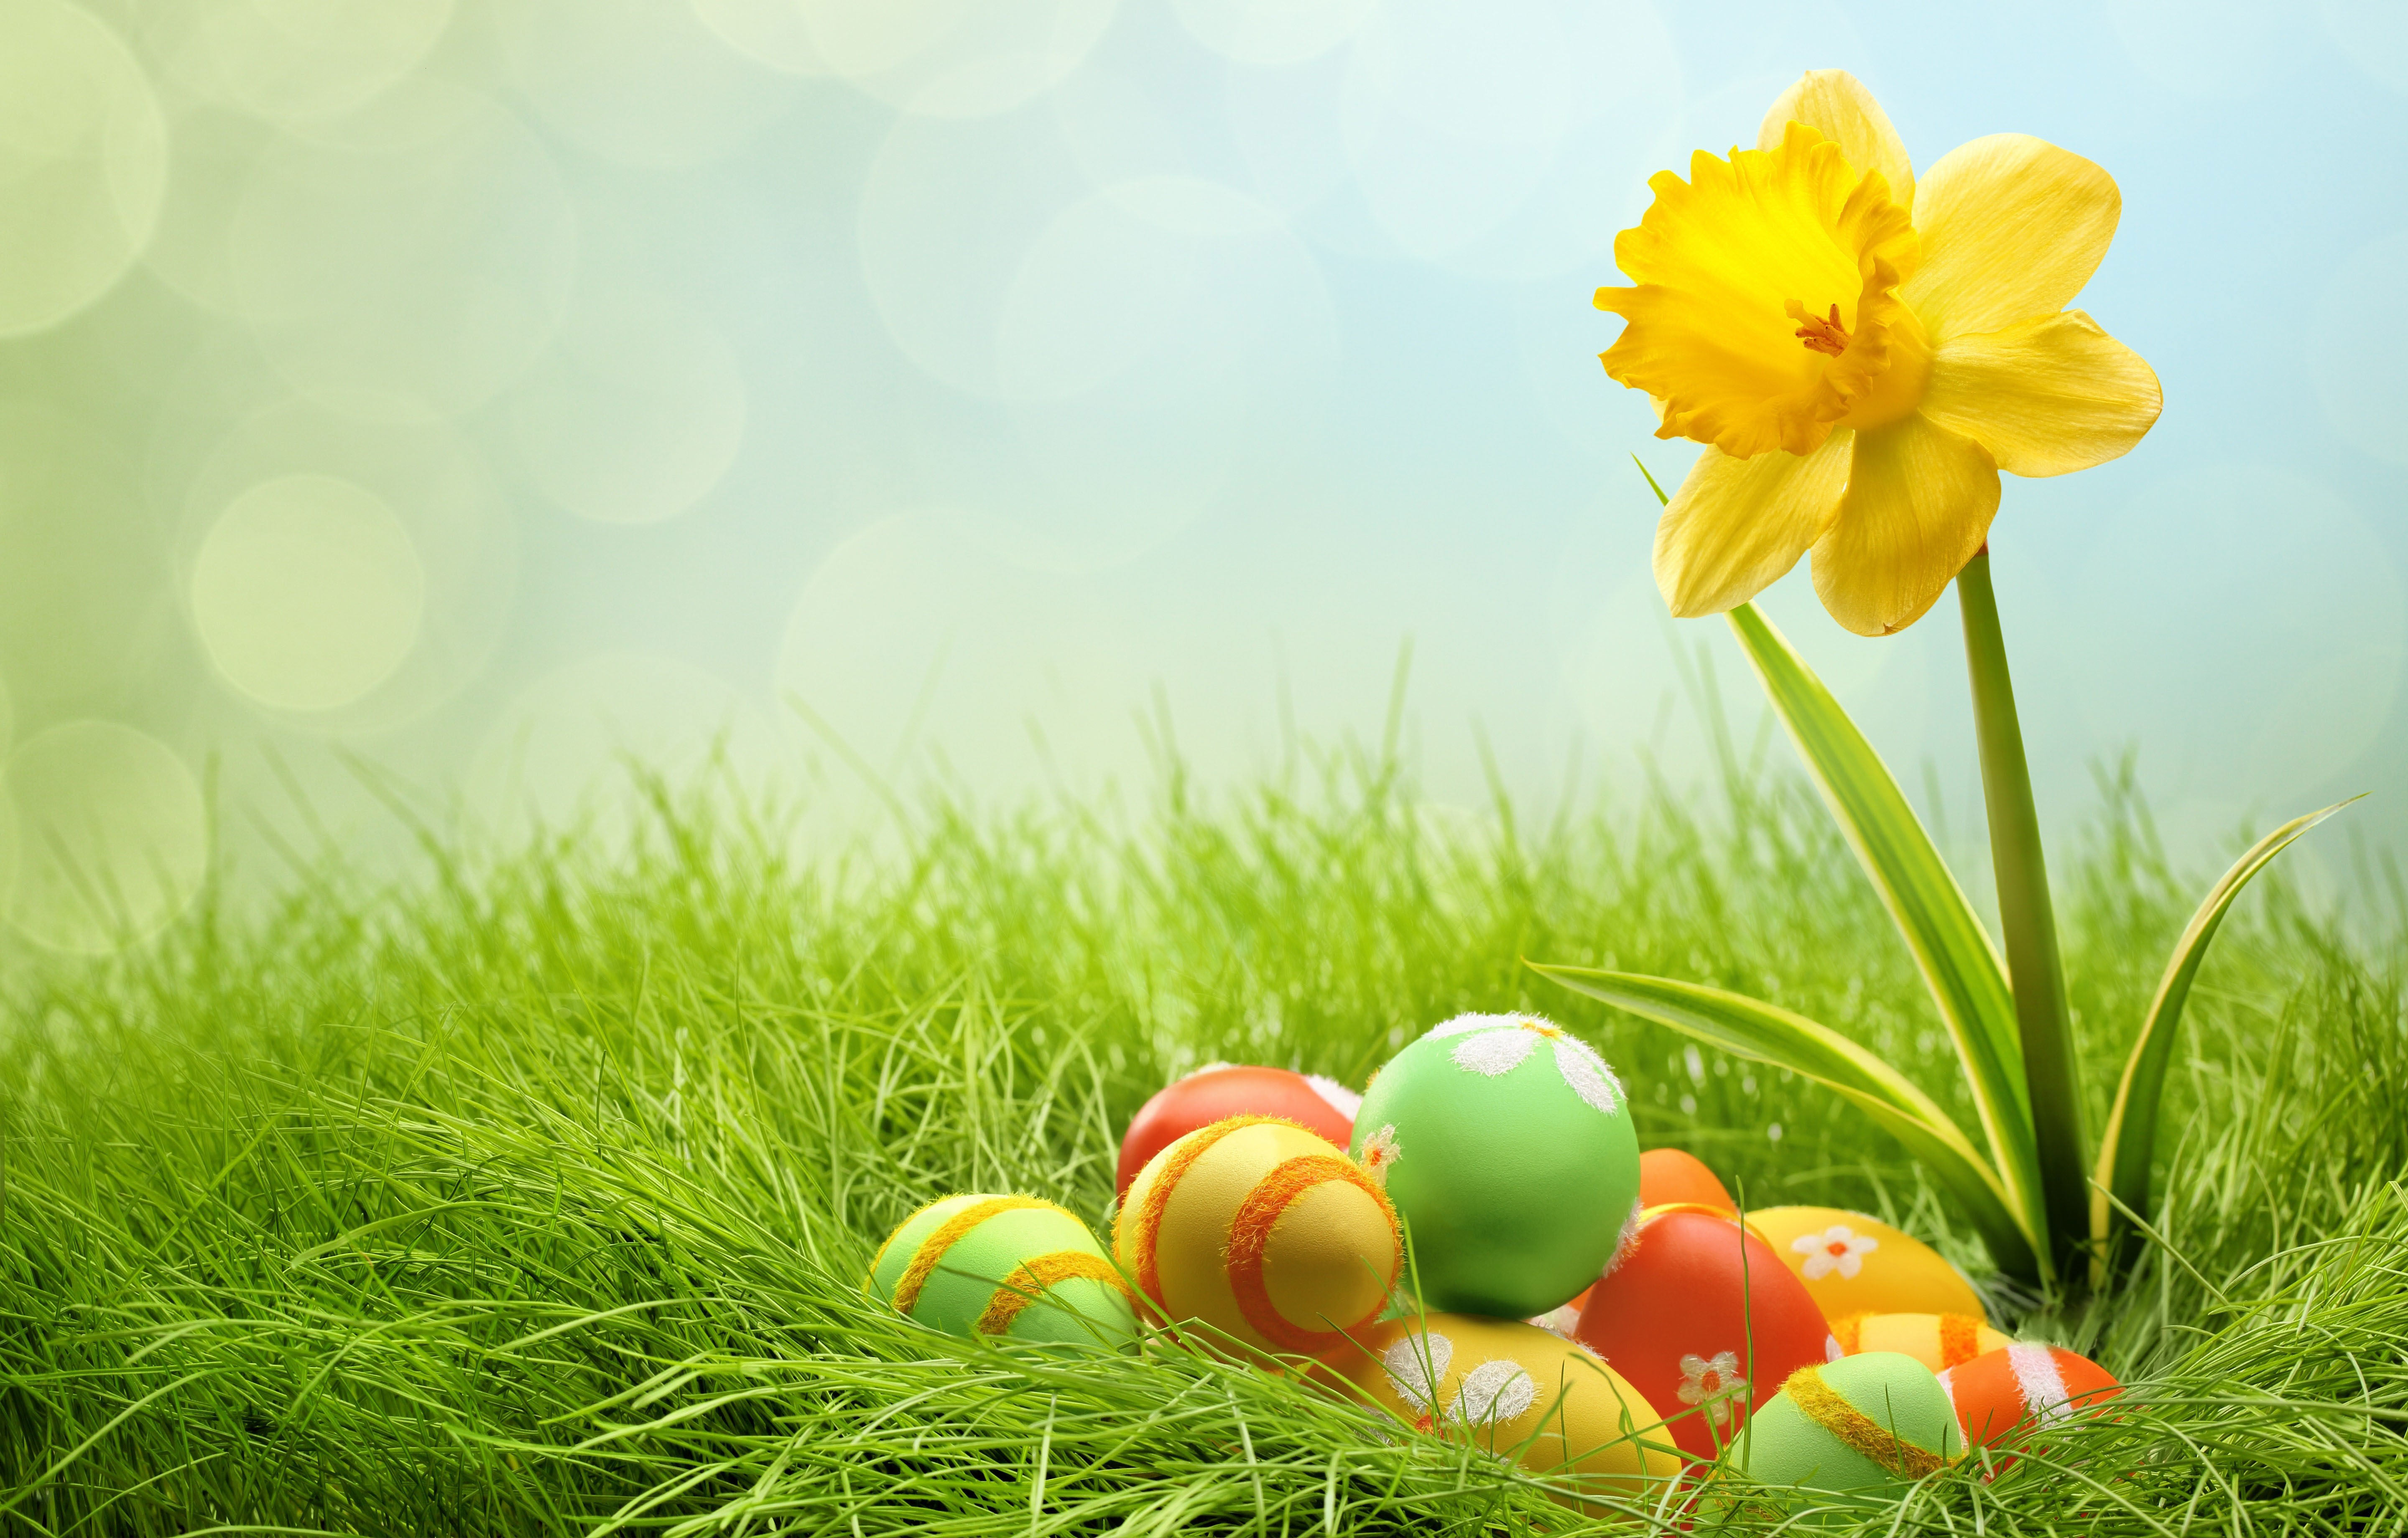 free easter wallpaper,people in nature,grass,easter egg,yellow,easter